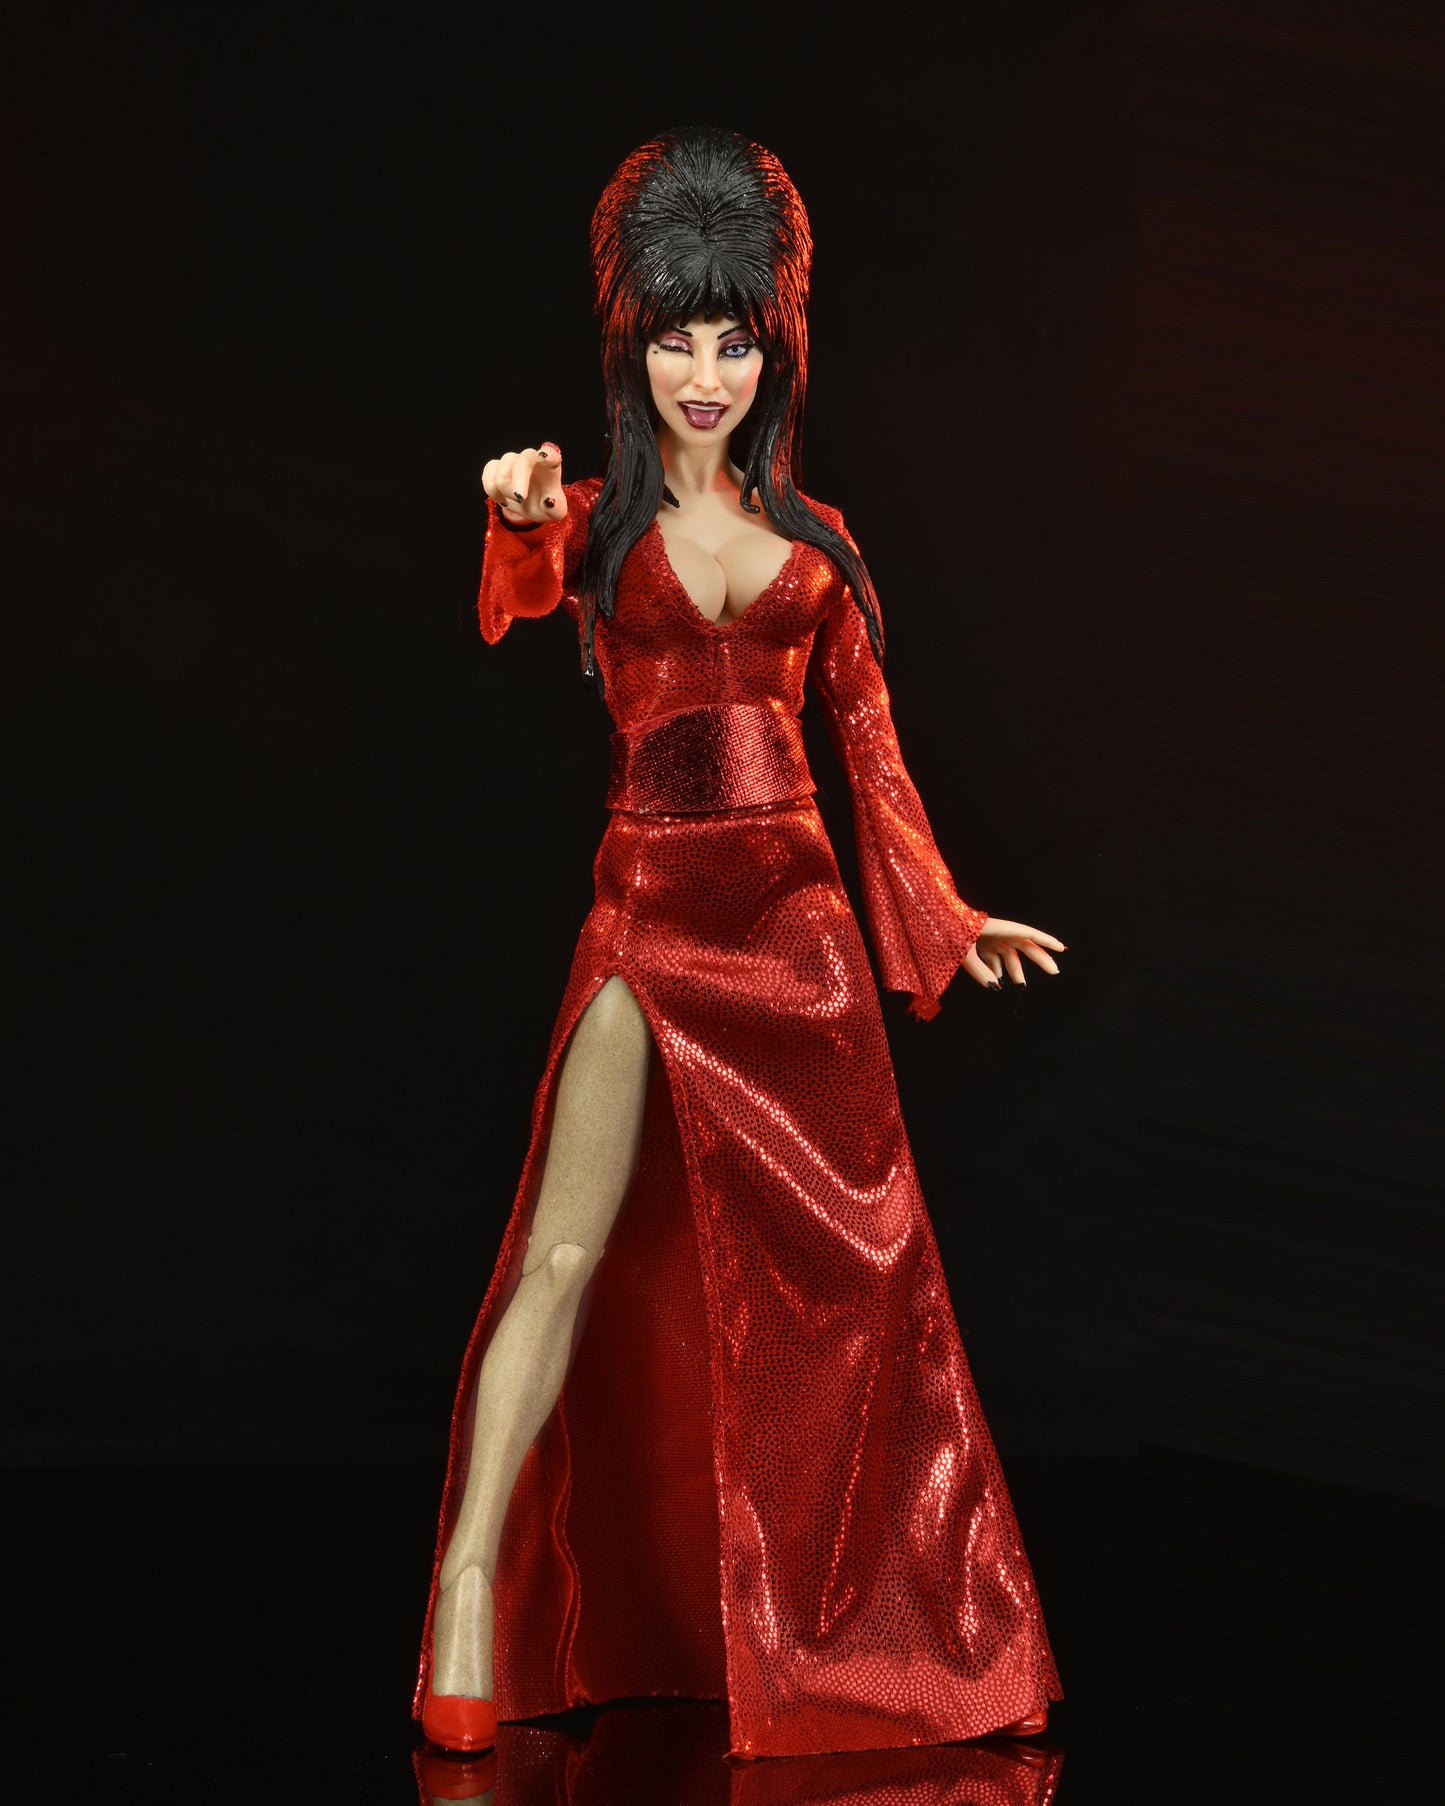 ELVIRA RED FRIGHT AND BOO 6IN CLOTHED